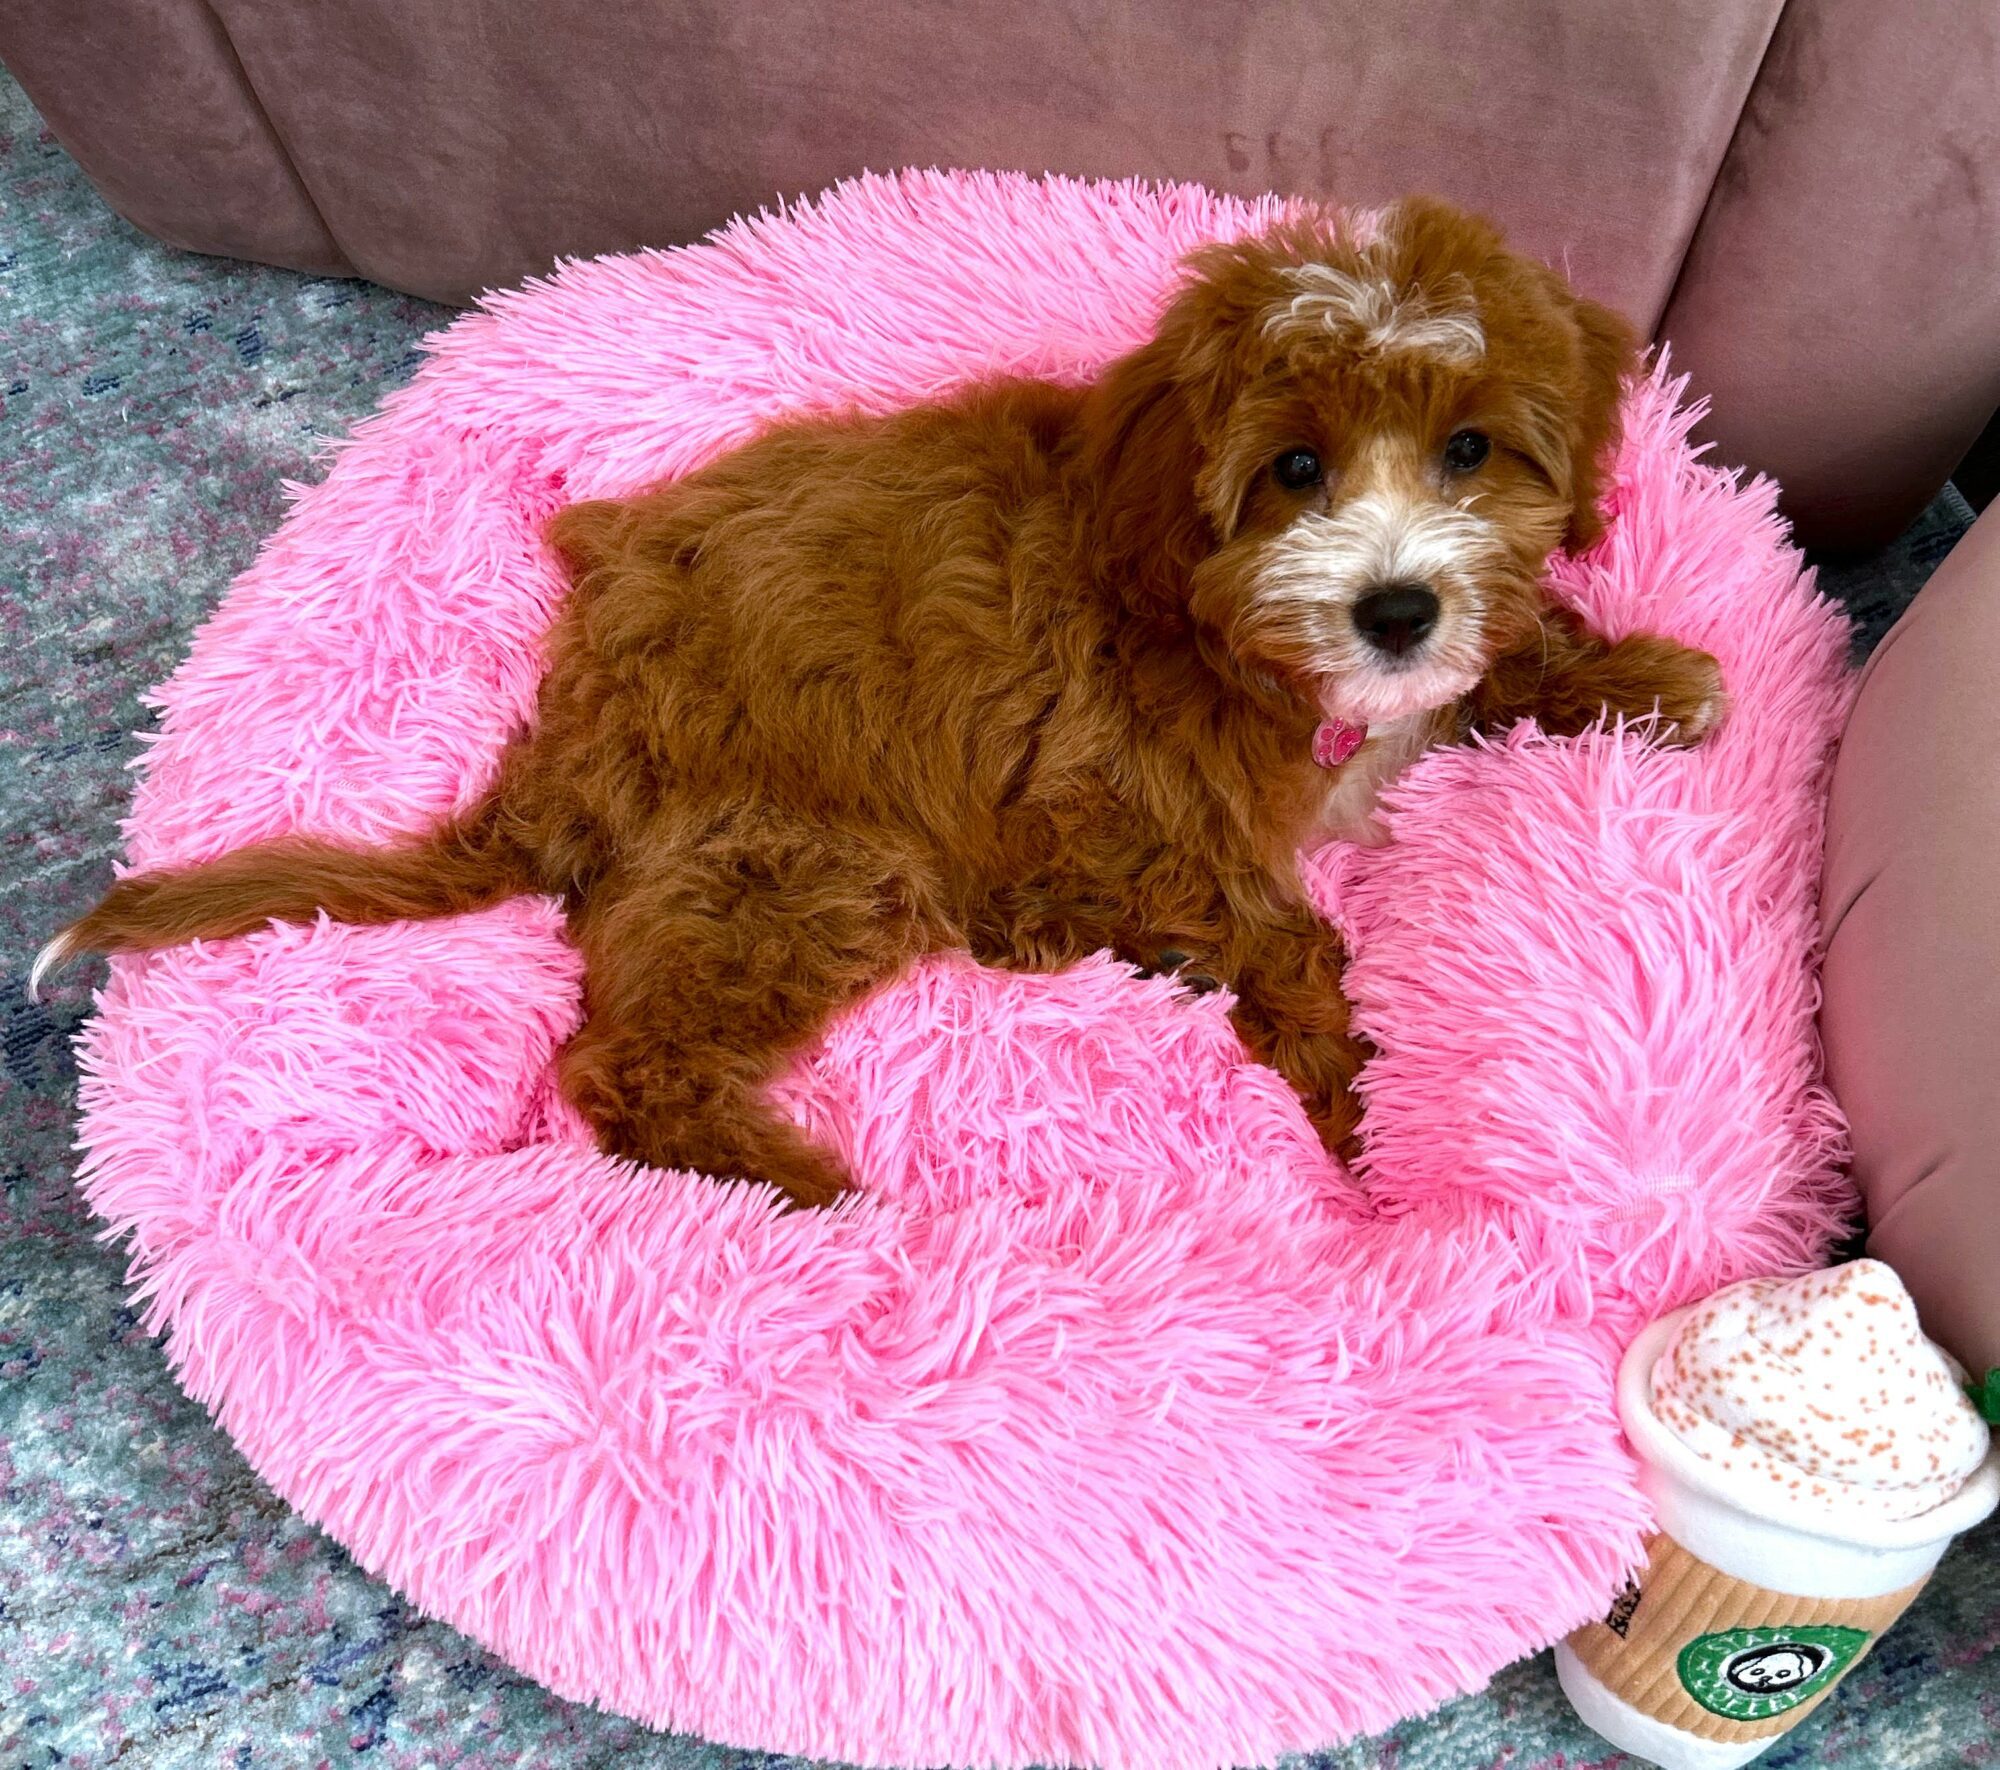 A puppy laying in a dog bed.